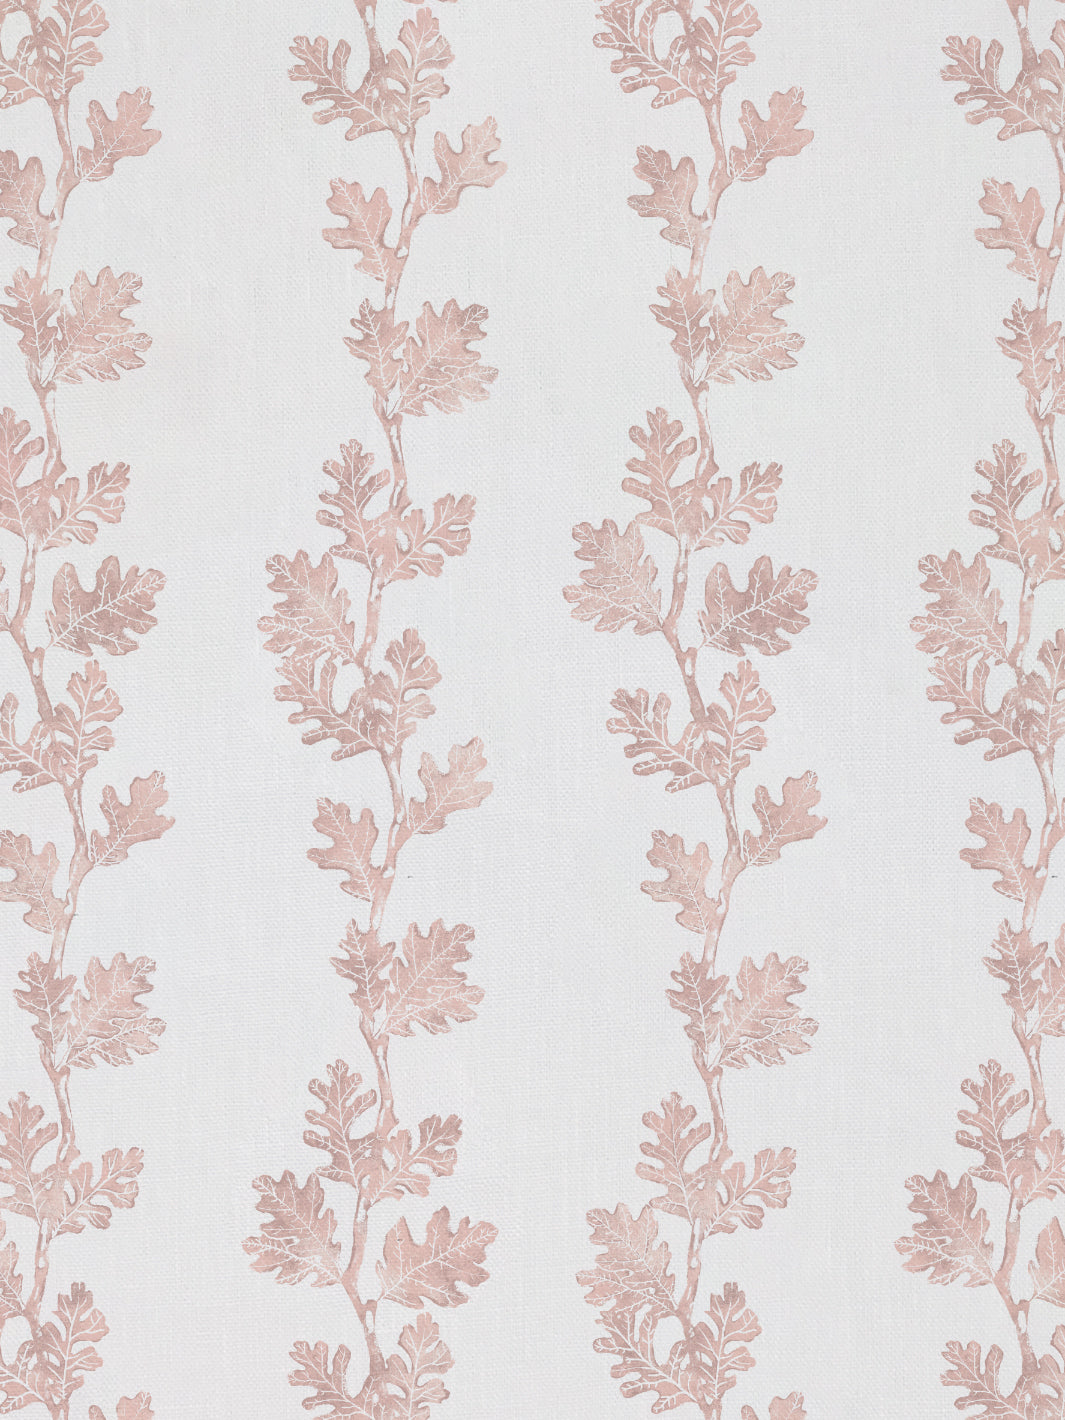 'Valley Oak Stripe' Linen Fabric by Nathan Turner - Pink